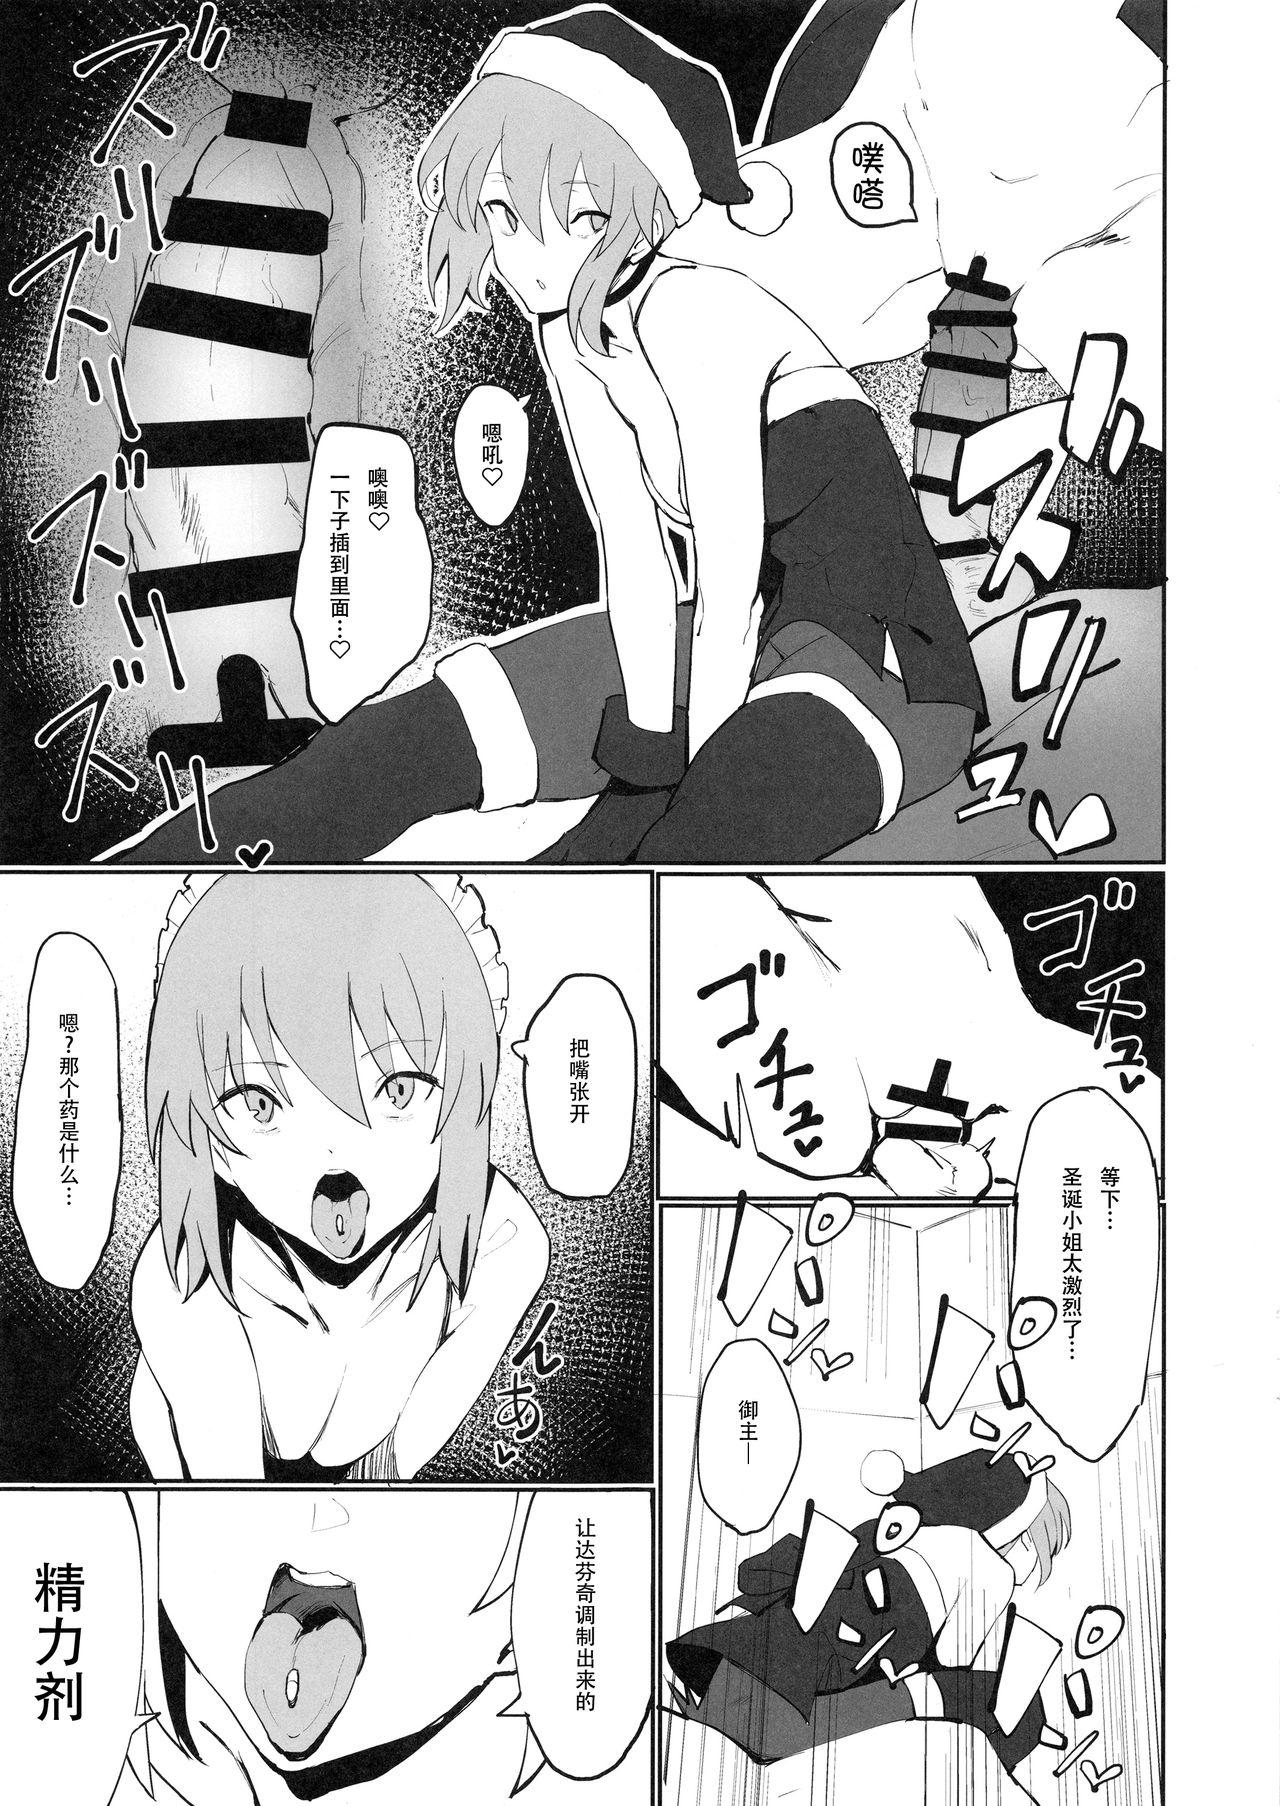 From Saber Alter to Maryoku Kyoukyuu | 和saber alter的魔力供给♡ - Fate grand order Metendo - Page 10